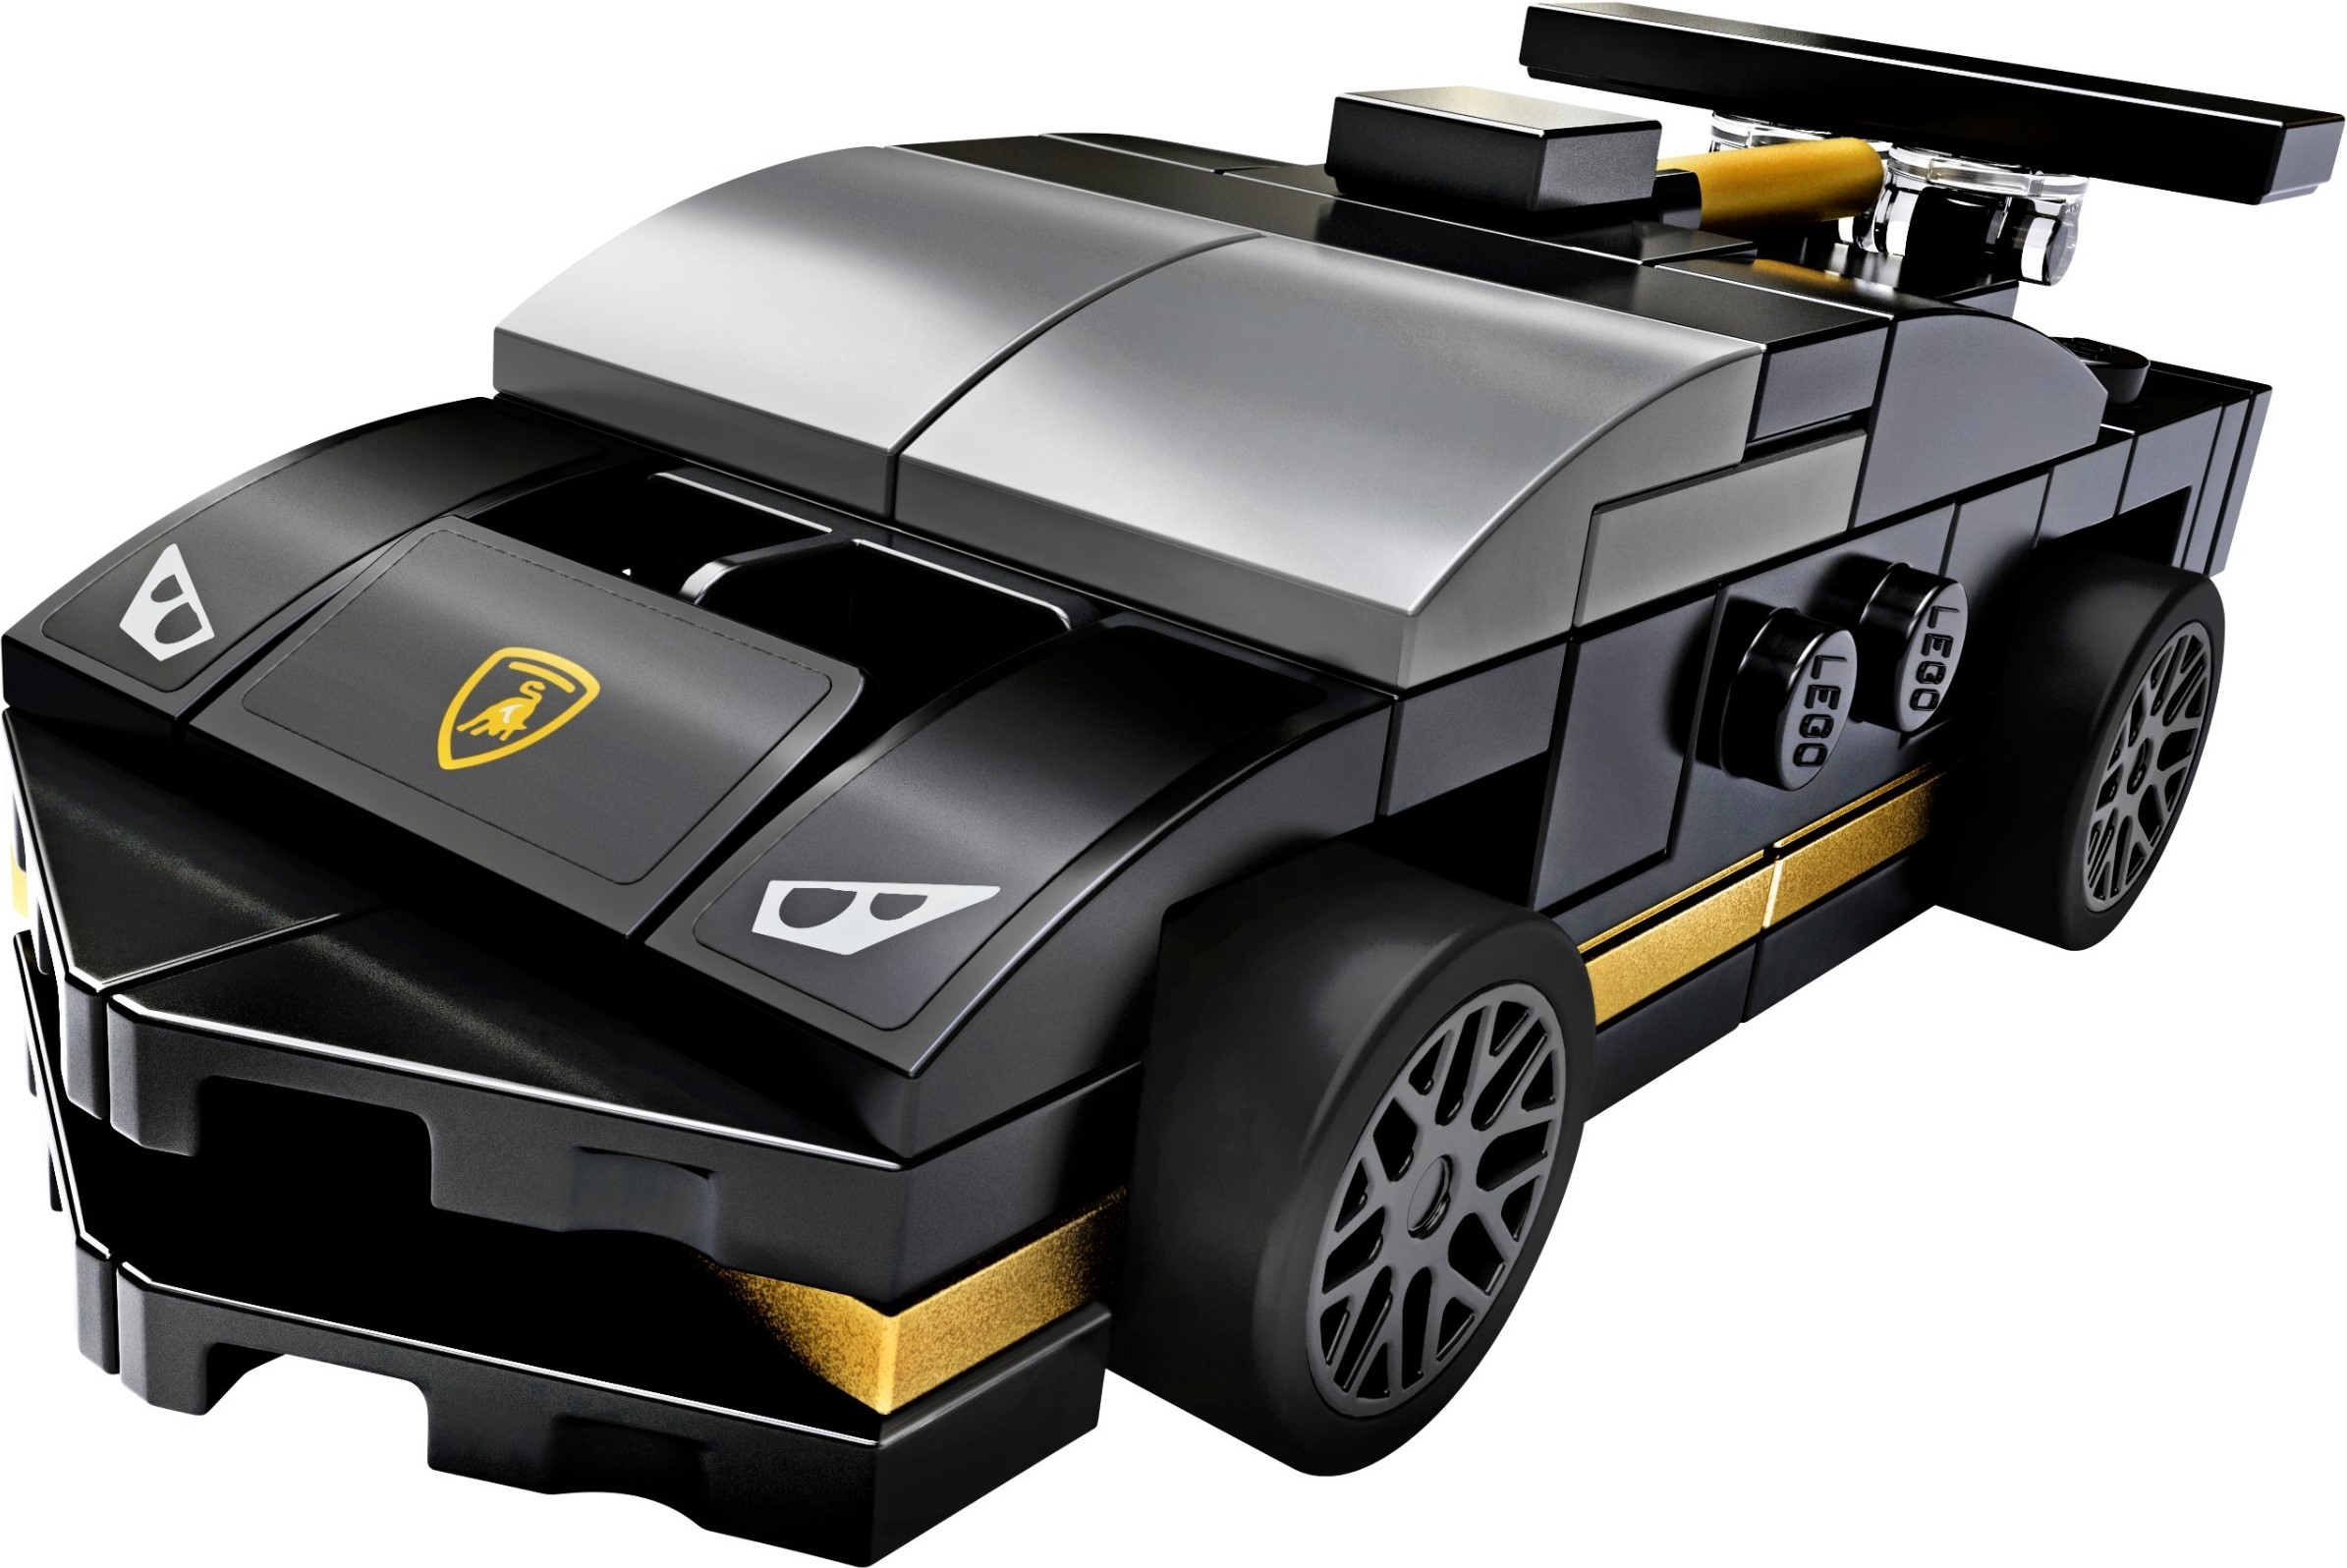 Lego Bugatti Chiron Speed Champions Review » Lego Sets Guide